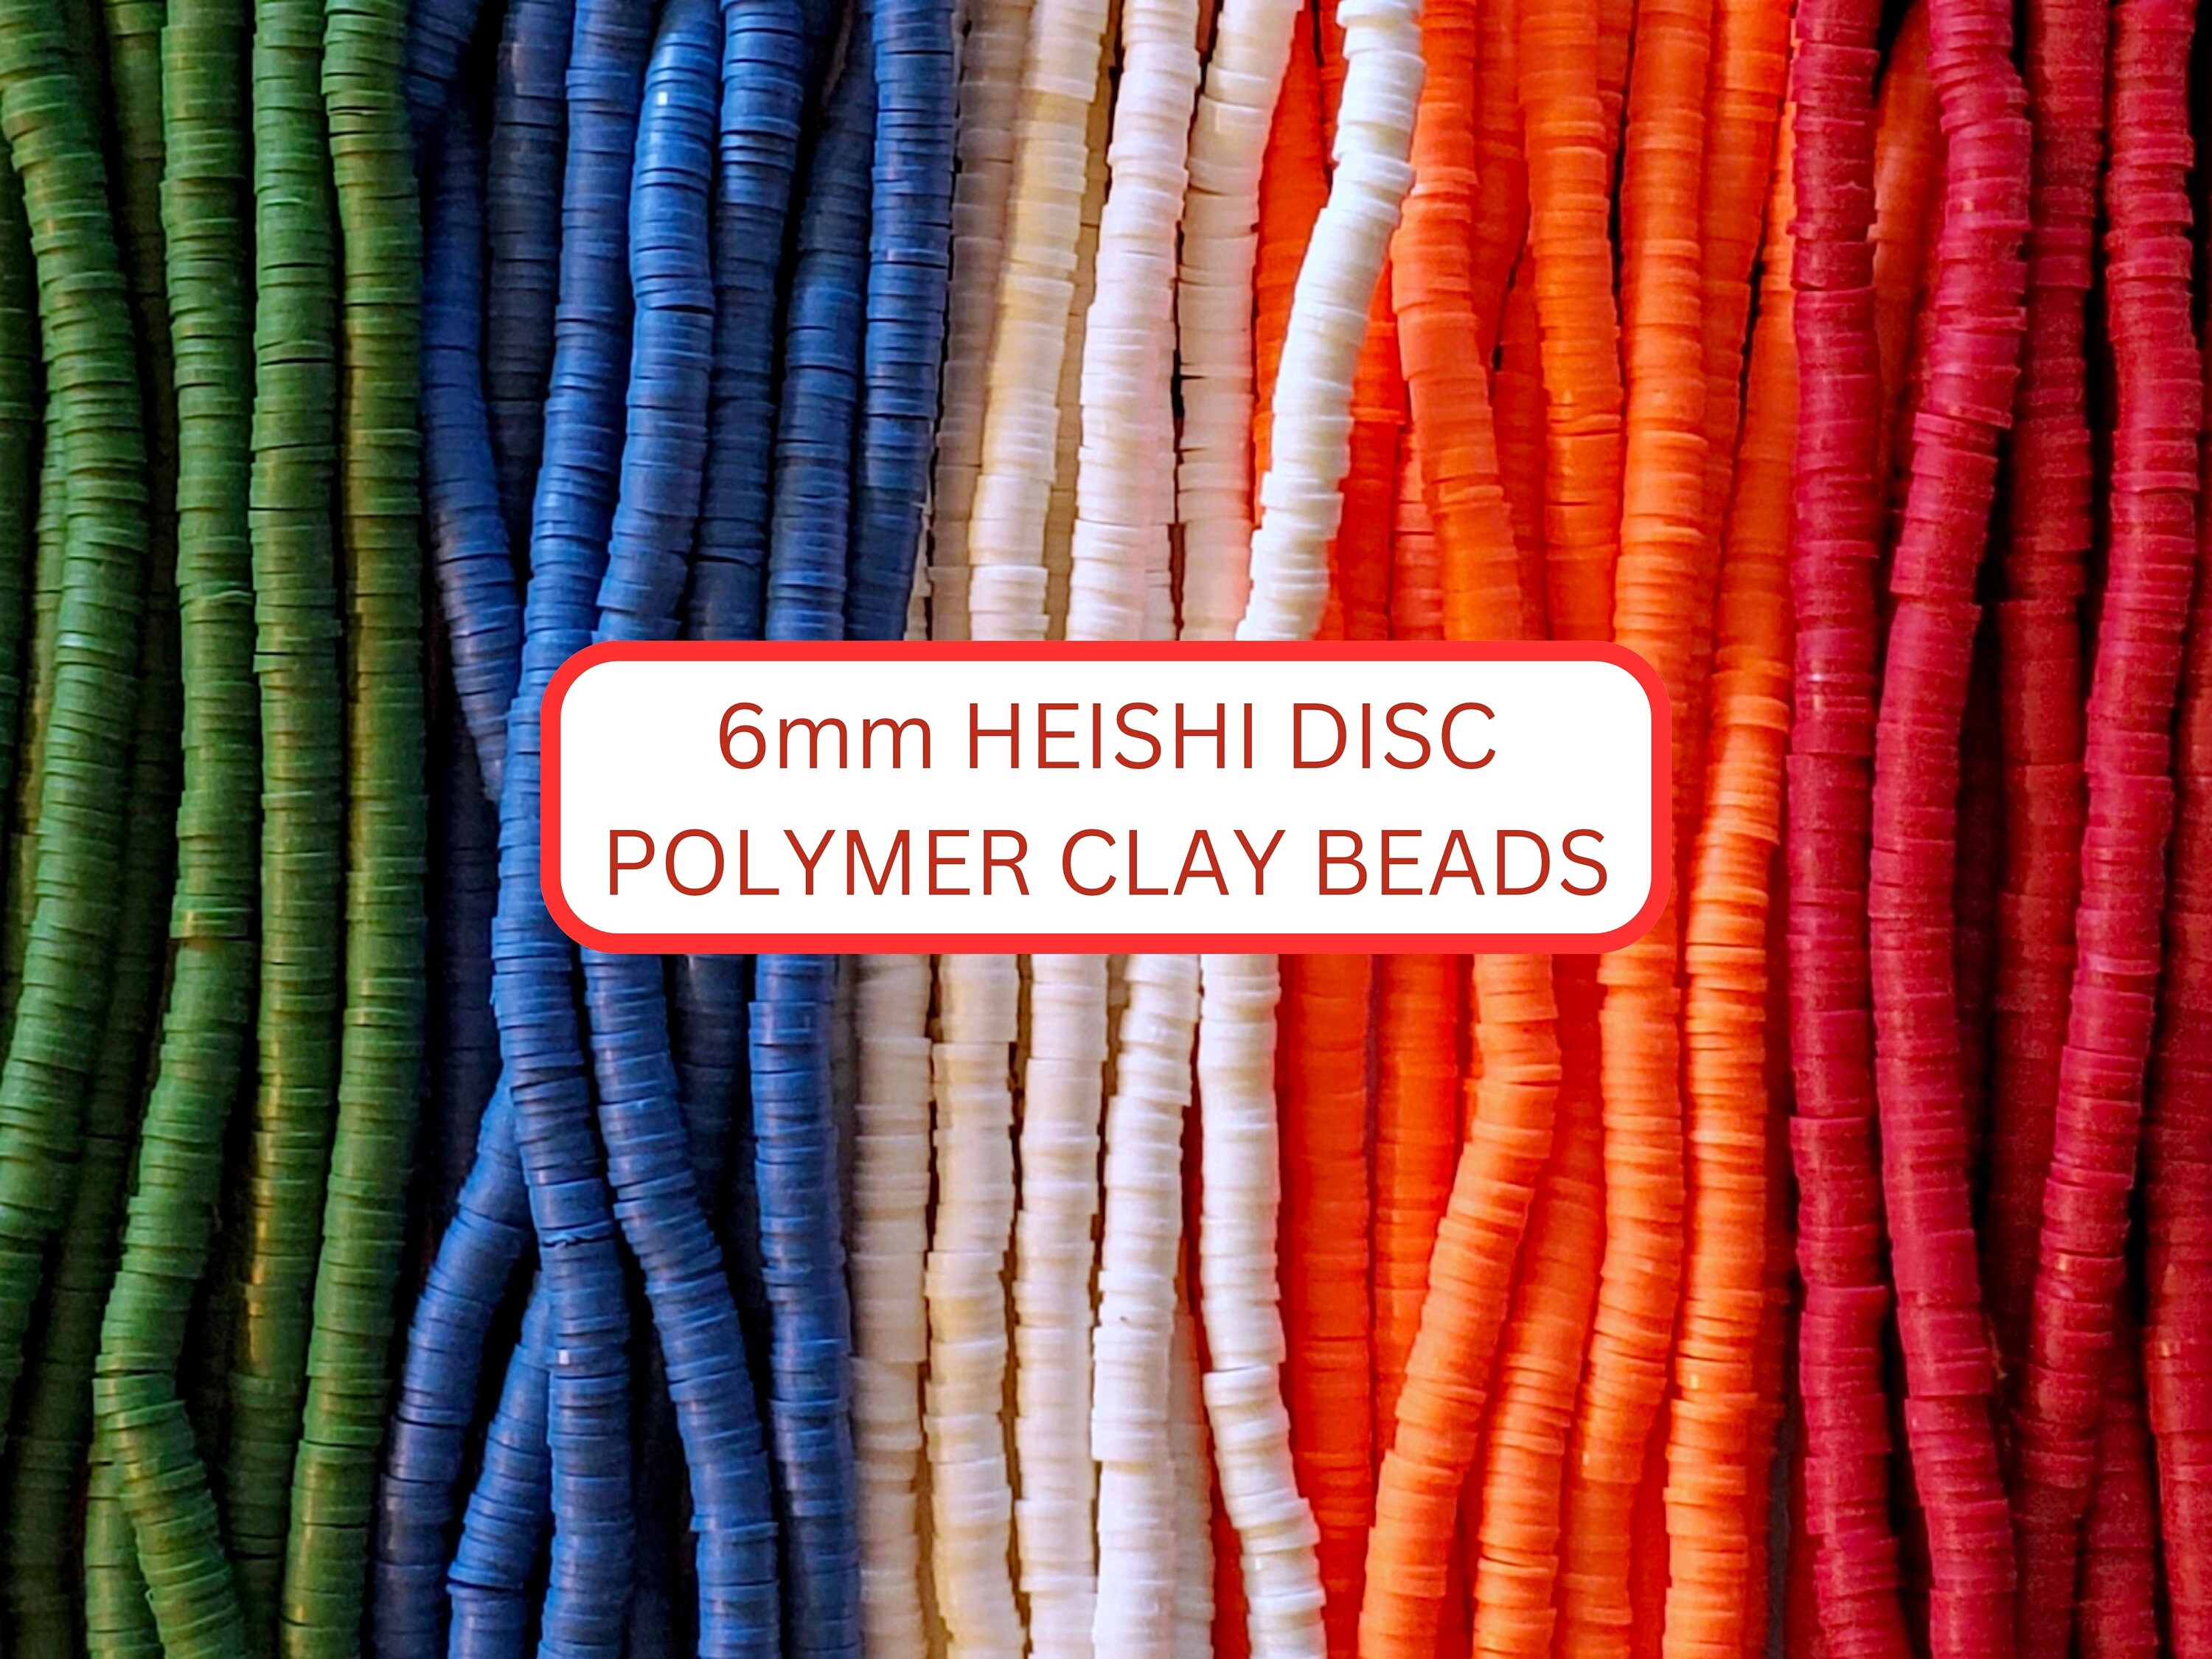 6mm Vinyl Heishi, Red Blue, Polymer Clay Beads, Heishi Bracelet Beads,  Mixed Beads, Disc Shaped Beads, Beads for Kids, Jewelry Beads 